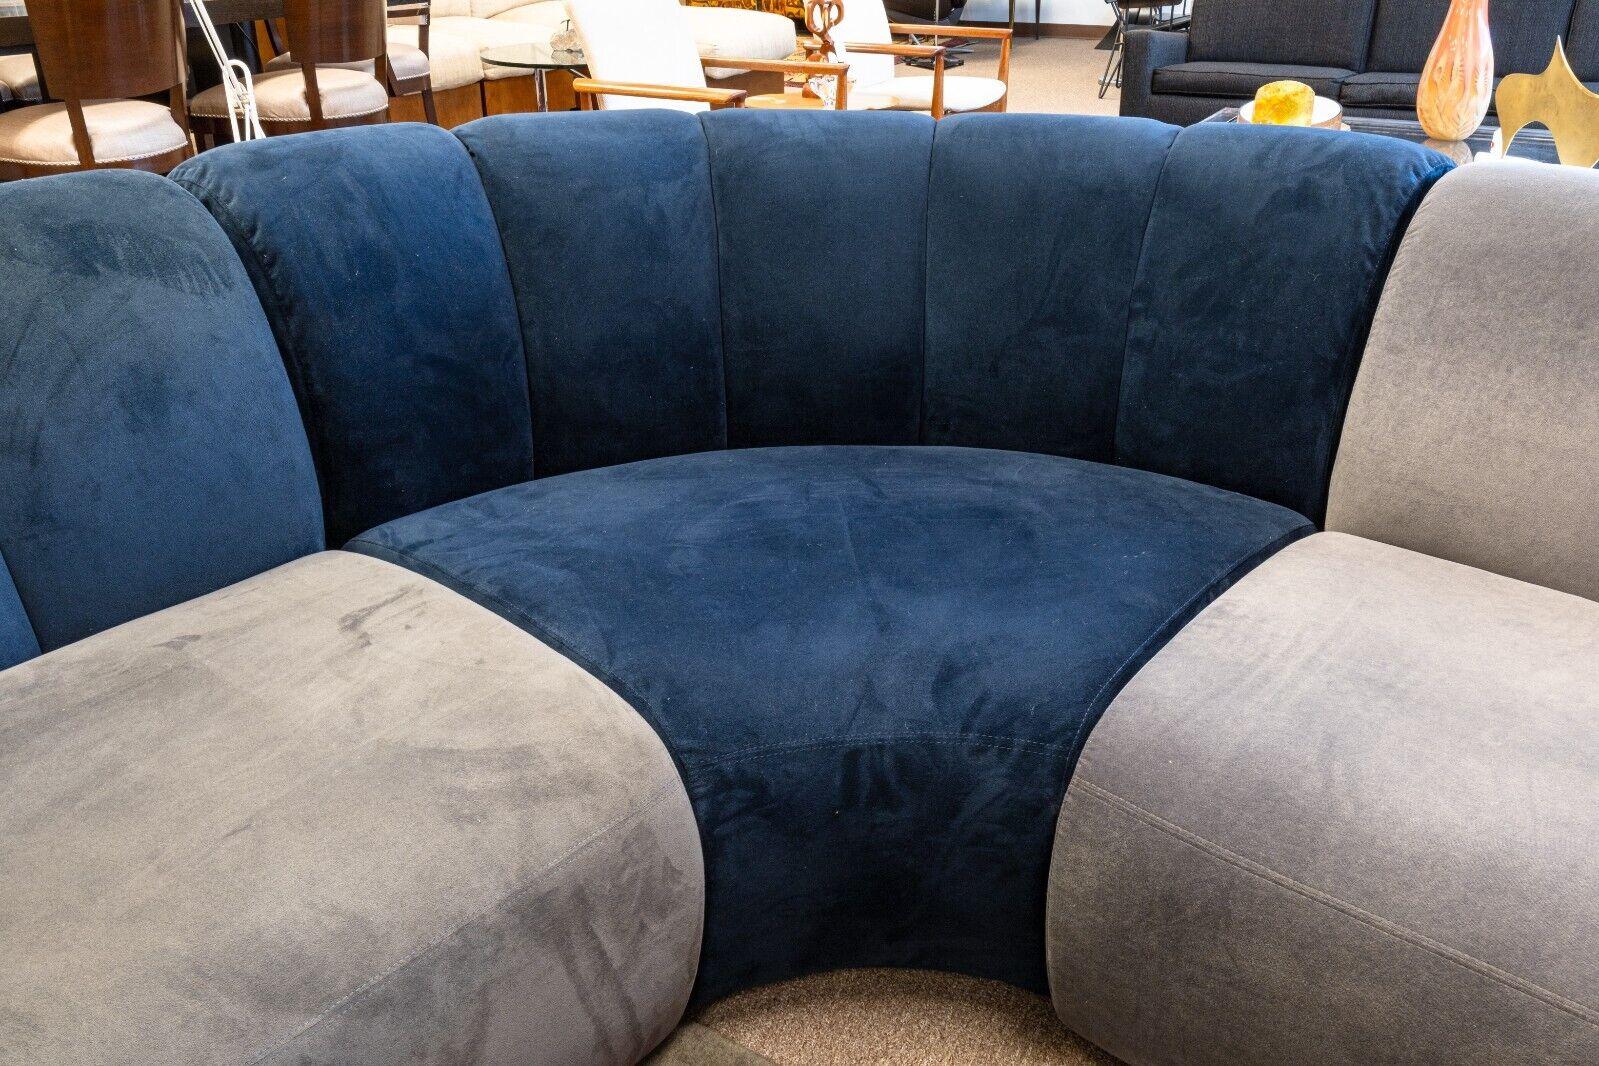 Contemporary West Elm x Steelcase Belle Prototype Navy and Grey Sectional Sofa In Good Condition For Sale In Keego Harbor, MI